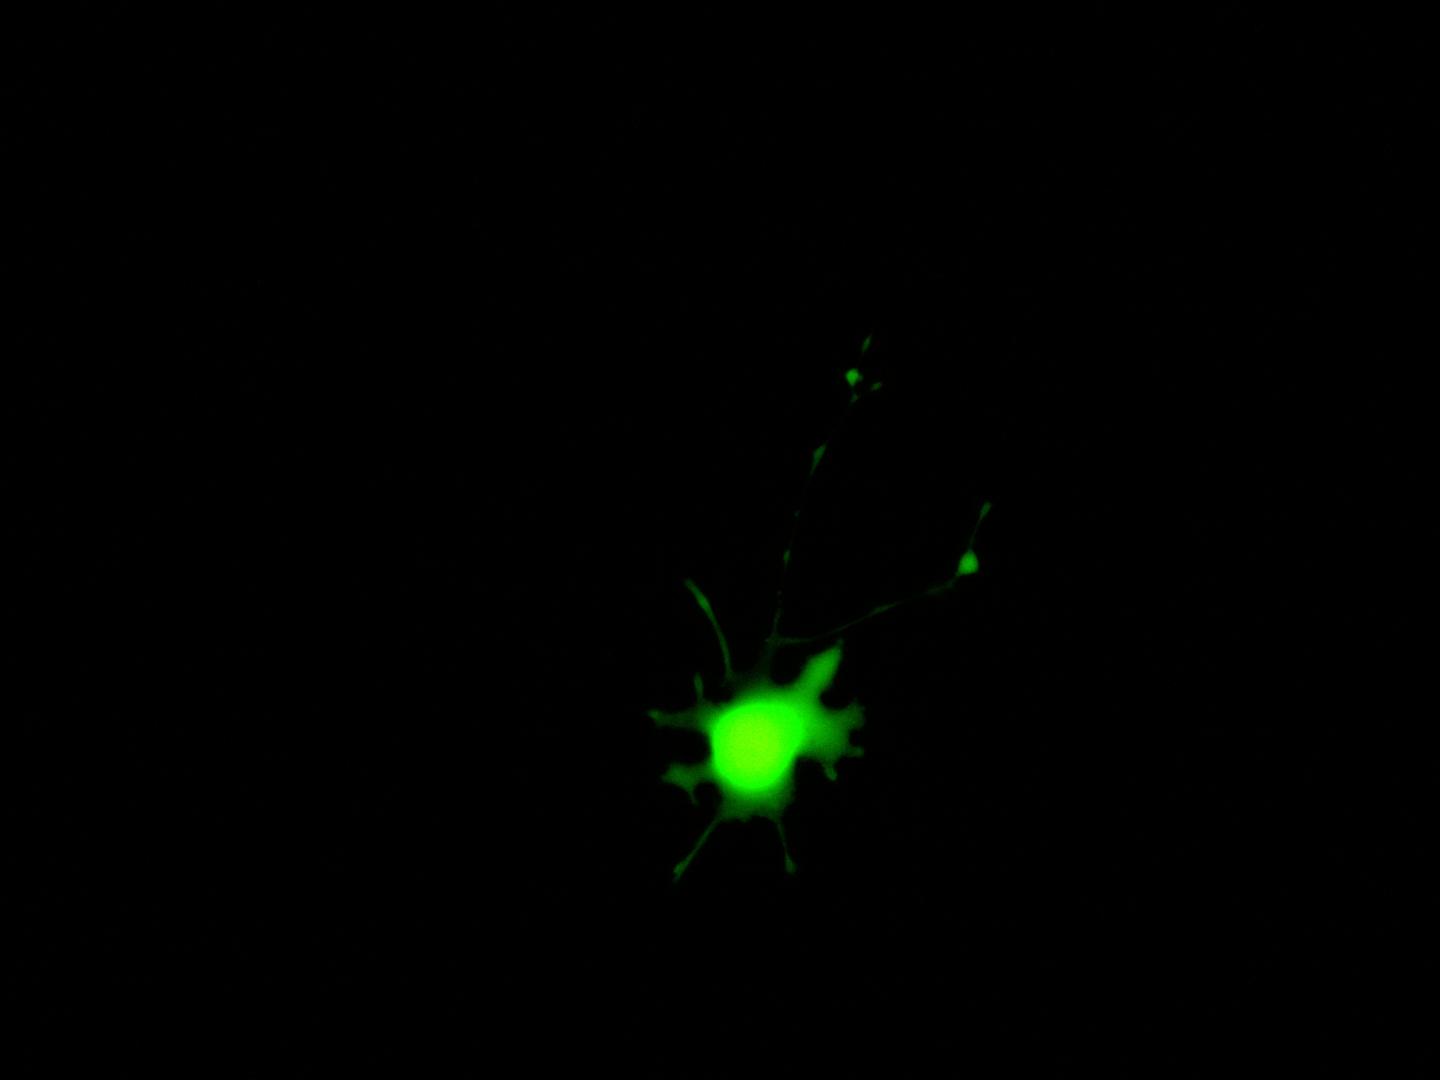 Astrocyte infected with a modified version of SARS-CoV-2